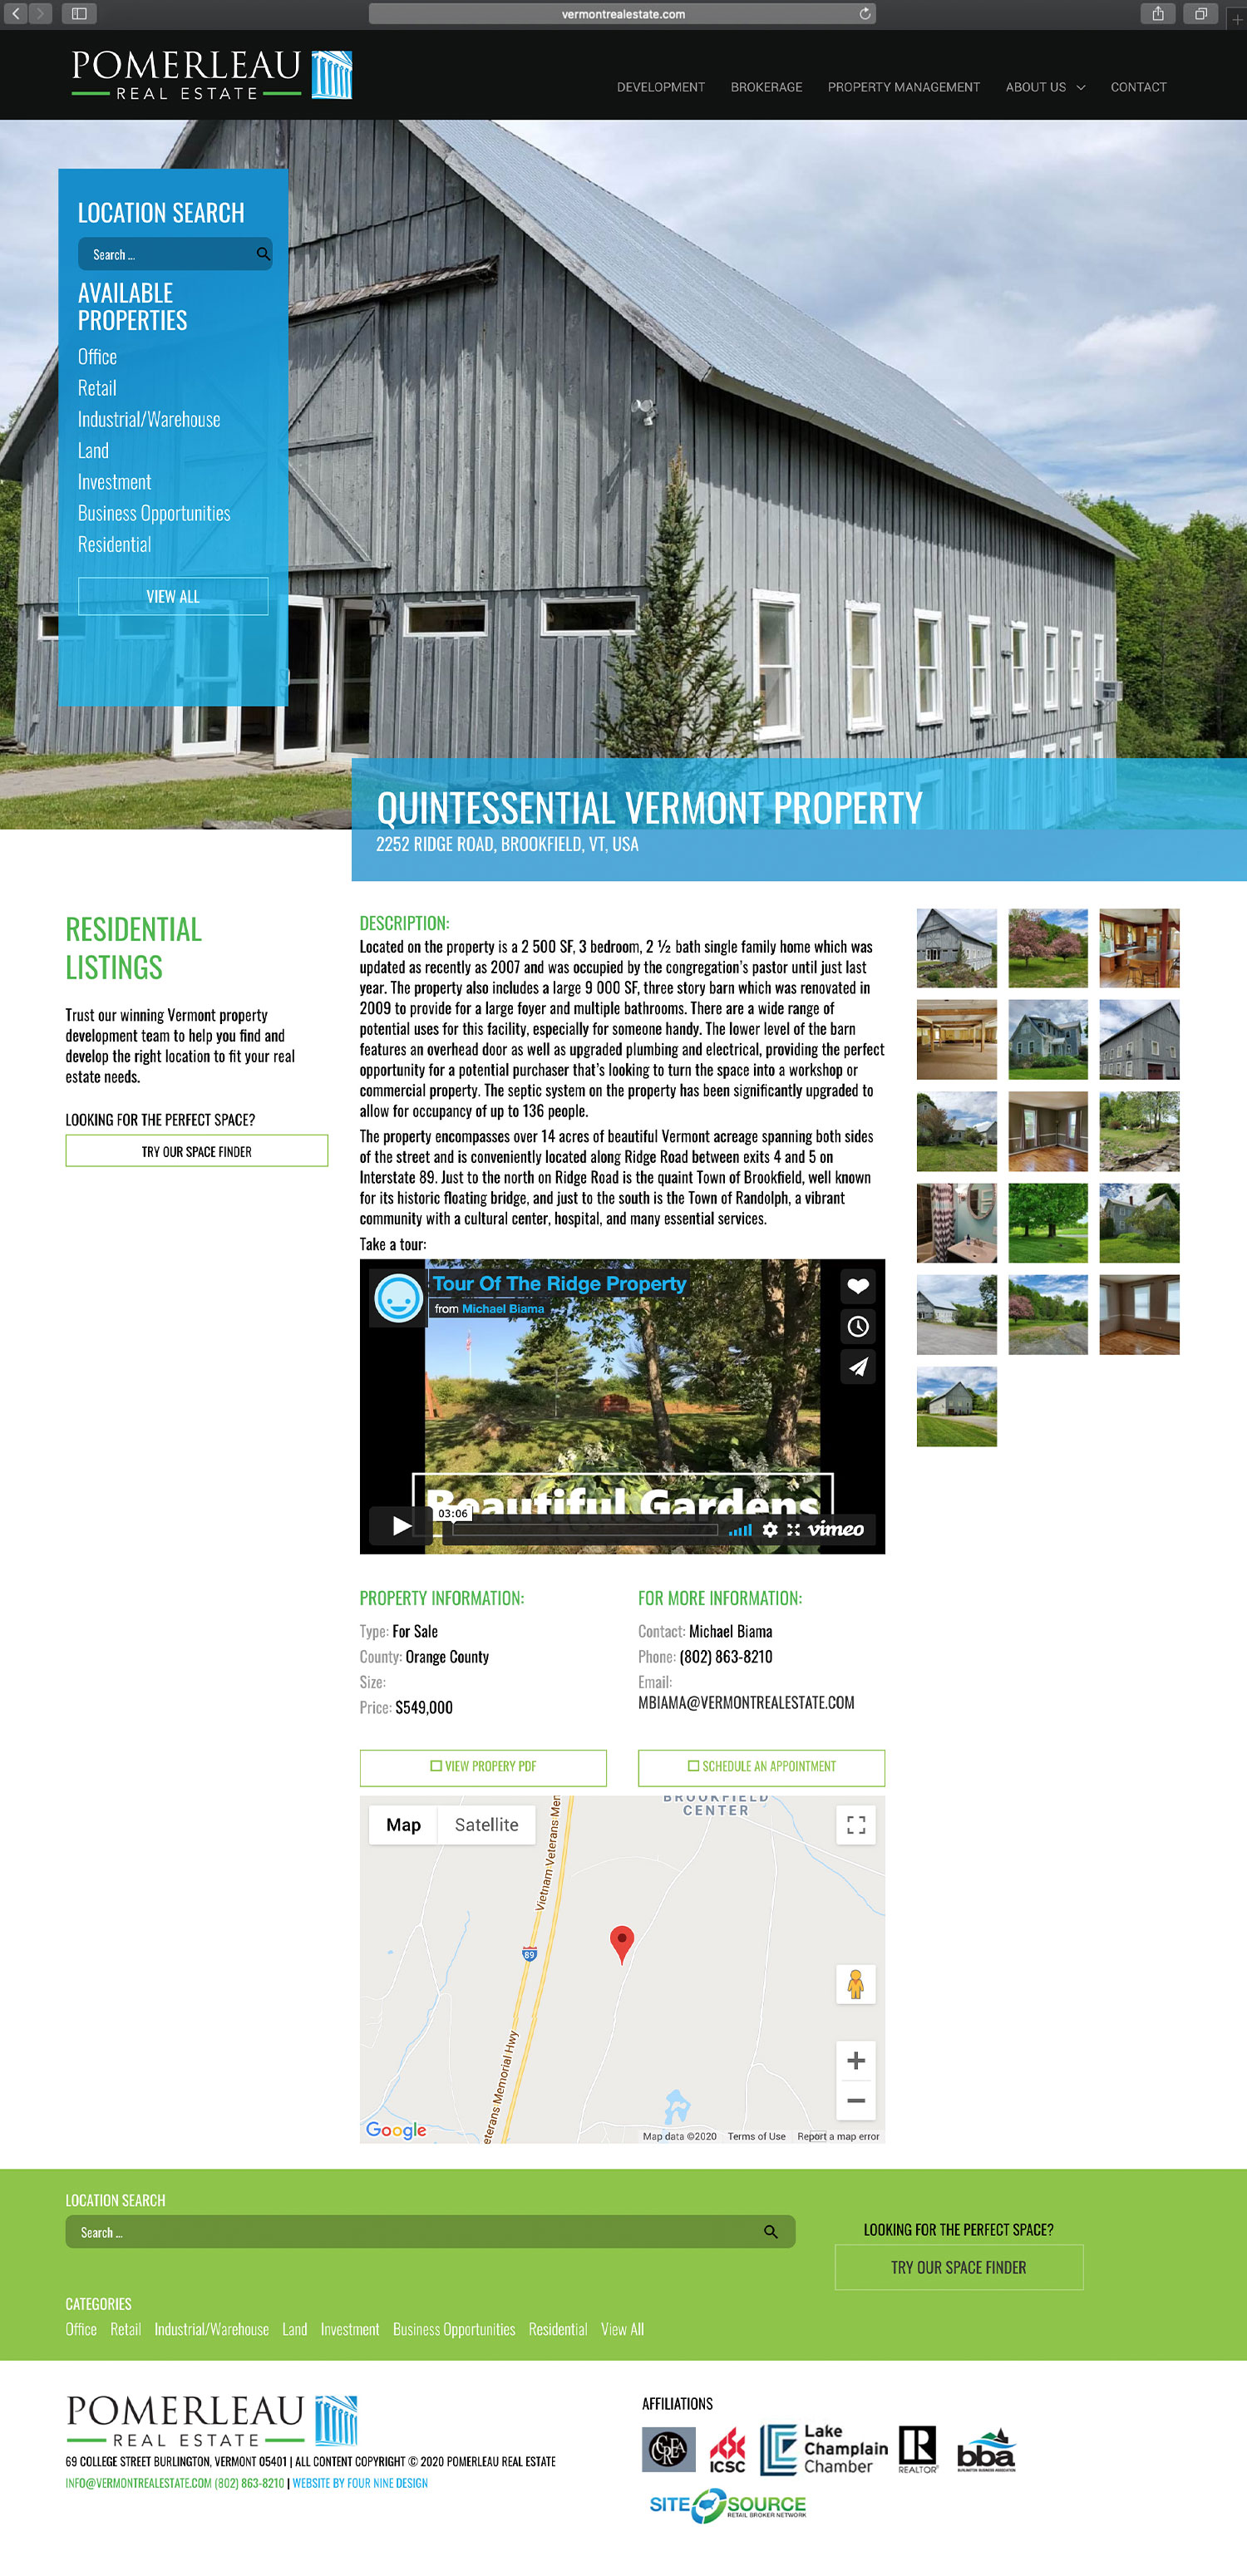 Website design and website development for Pomerleau Real Estate - secondary page view.